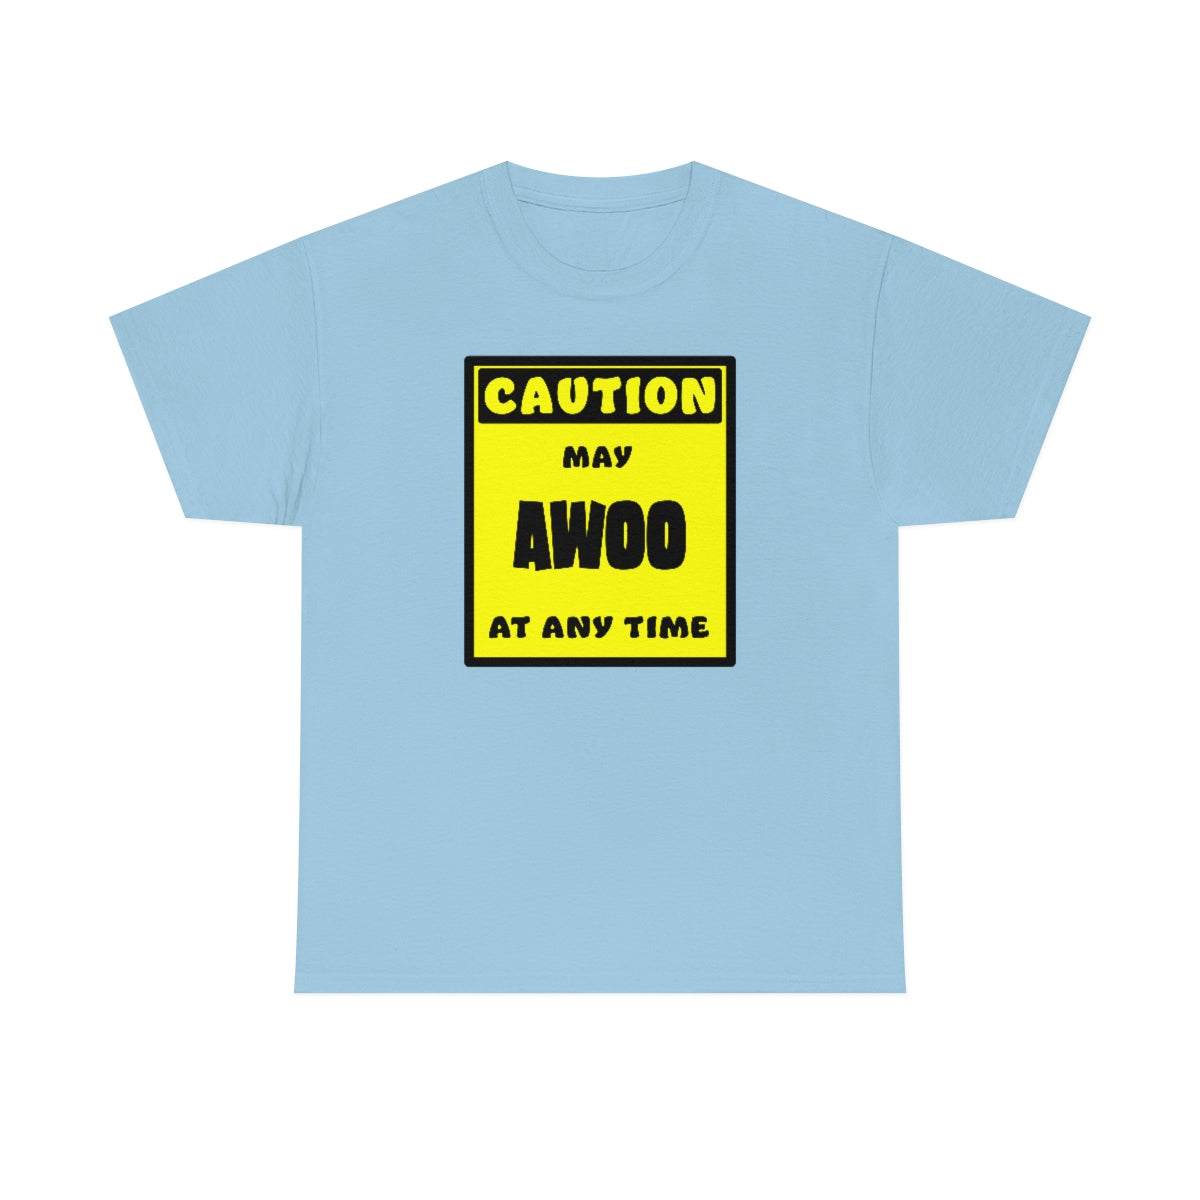 CAUTION! May AWOO at any time! - T-Shirt T-Shirt AFLT-Whootorca Light Blue S 